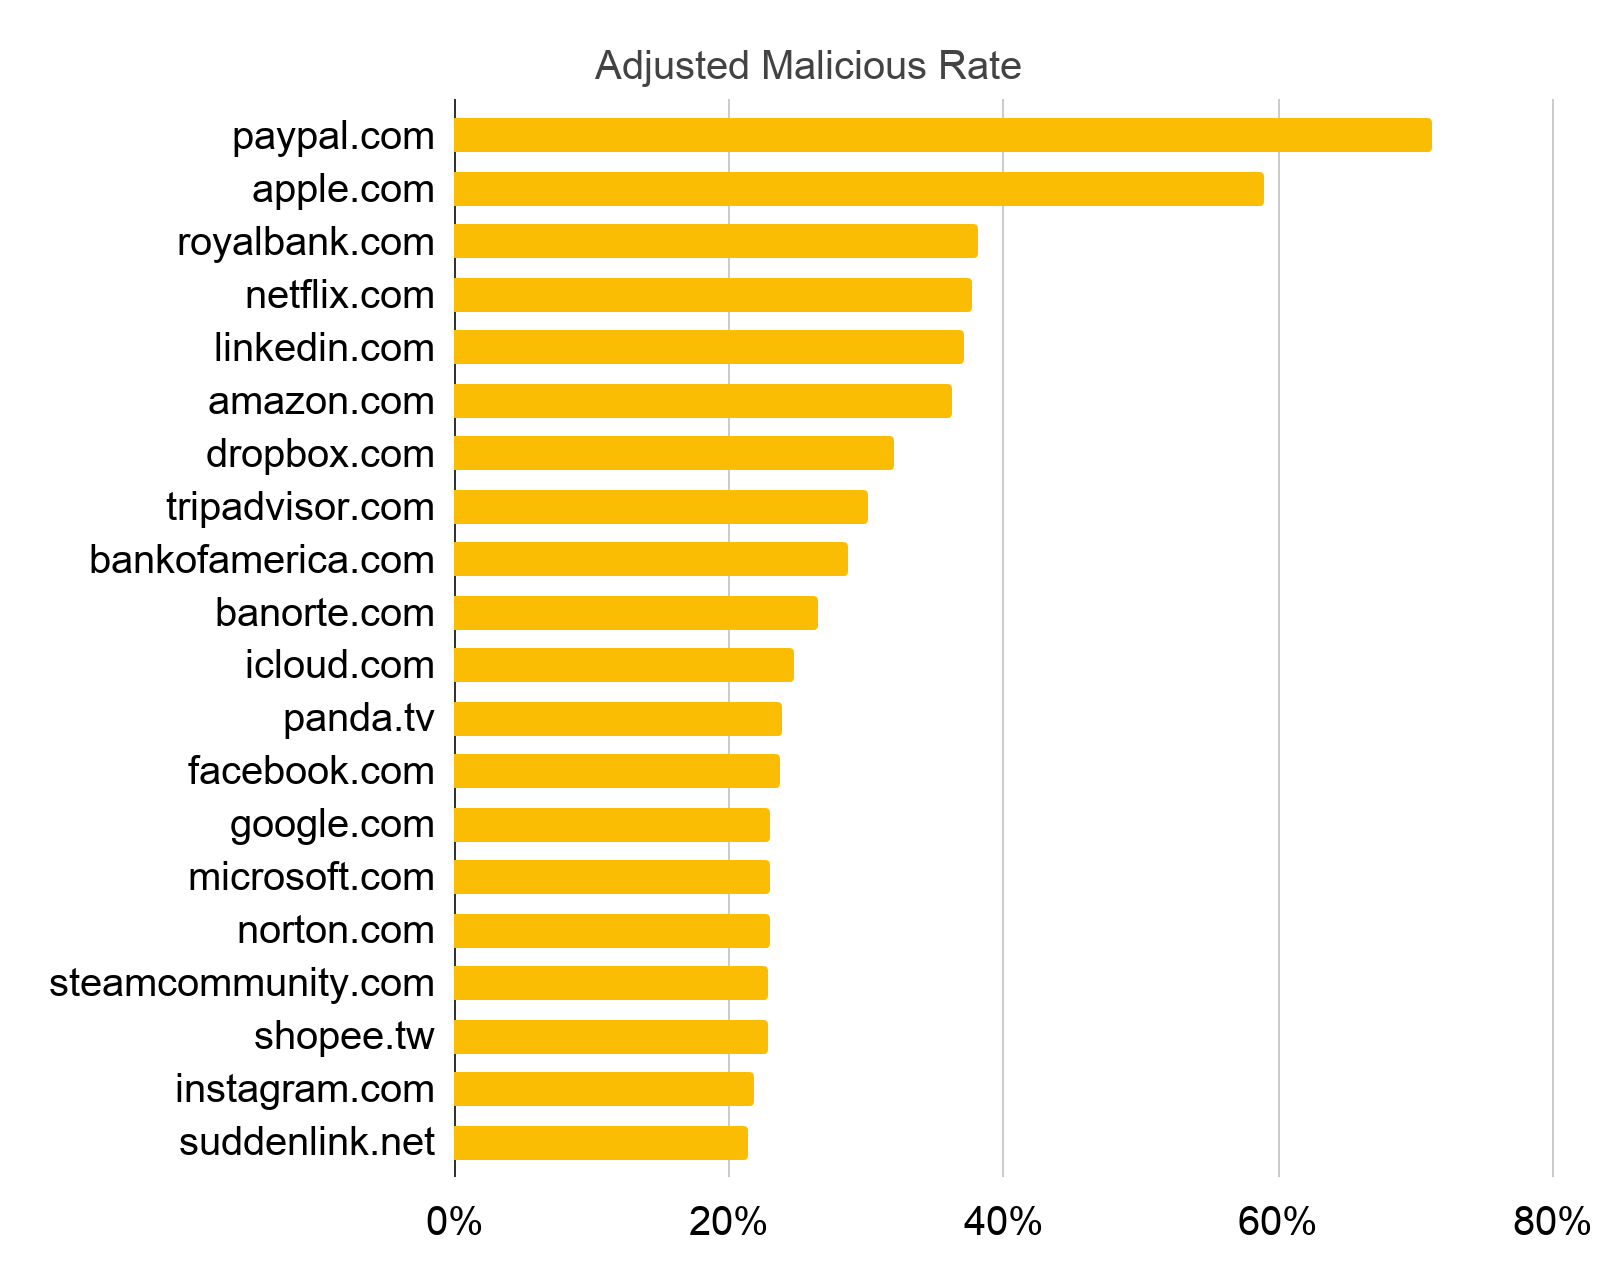 This graph ranks the Top 20 most abused domains, using an "adjusted malicious rate" metric to determine which domains are the favored targets of the practice of cybersquatting. 